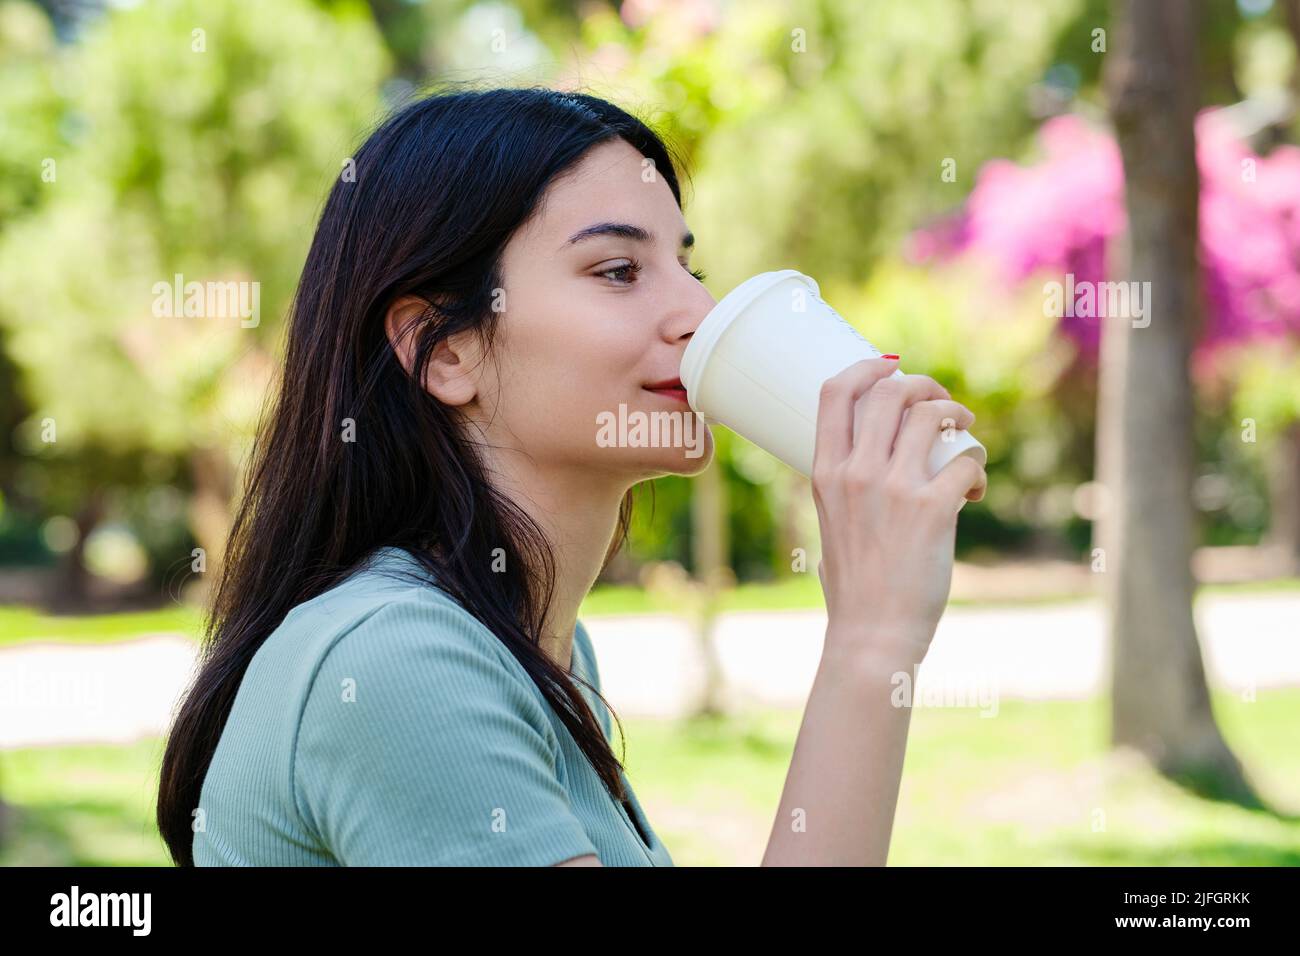 Brunette millennial woman wearing turquoise tee on city park, outdoors drinking takeaway coffee and looking into distance. Morning outdoors concept. Stock Photo